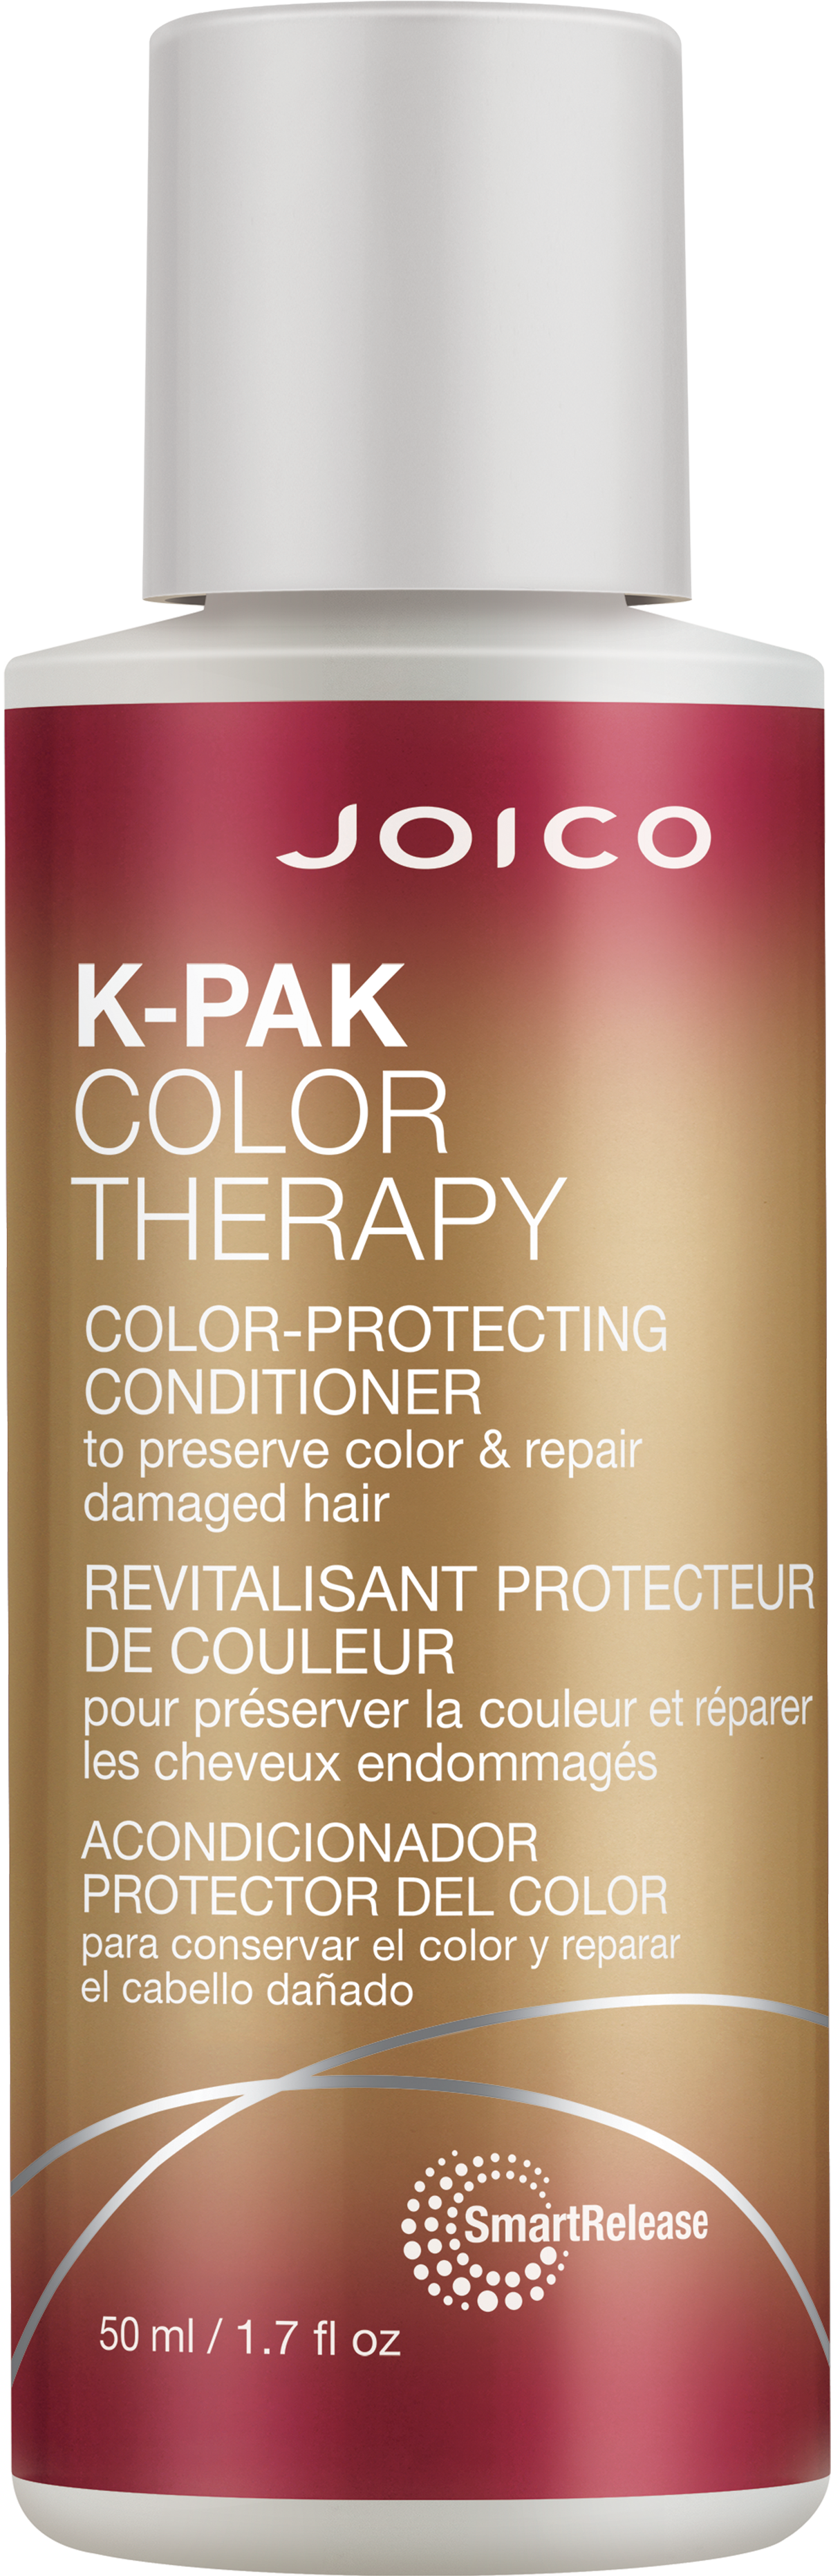 Joico K-pak Color Therapy Color-Protecting Conditioner 50 ml